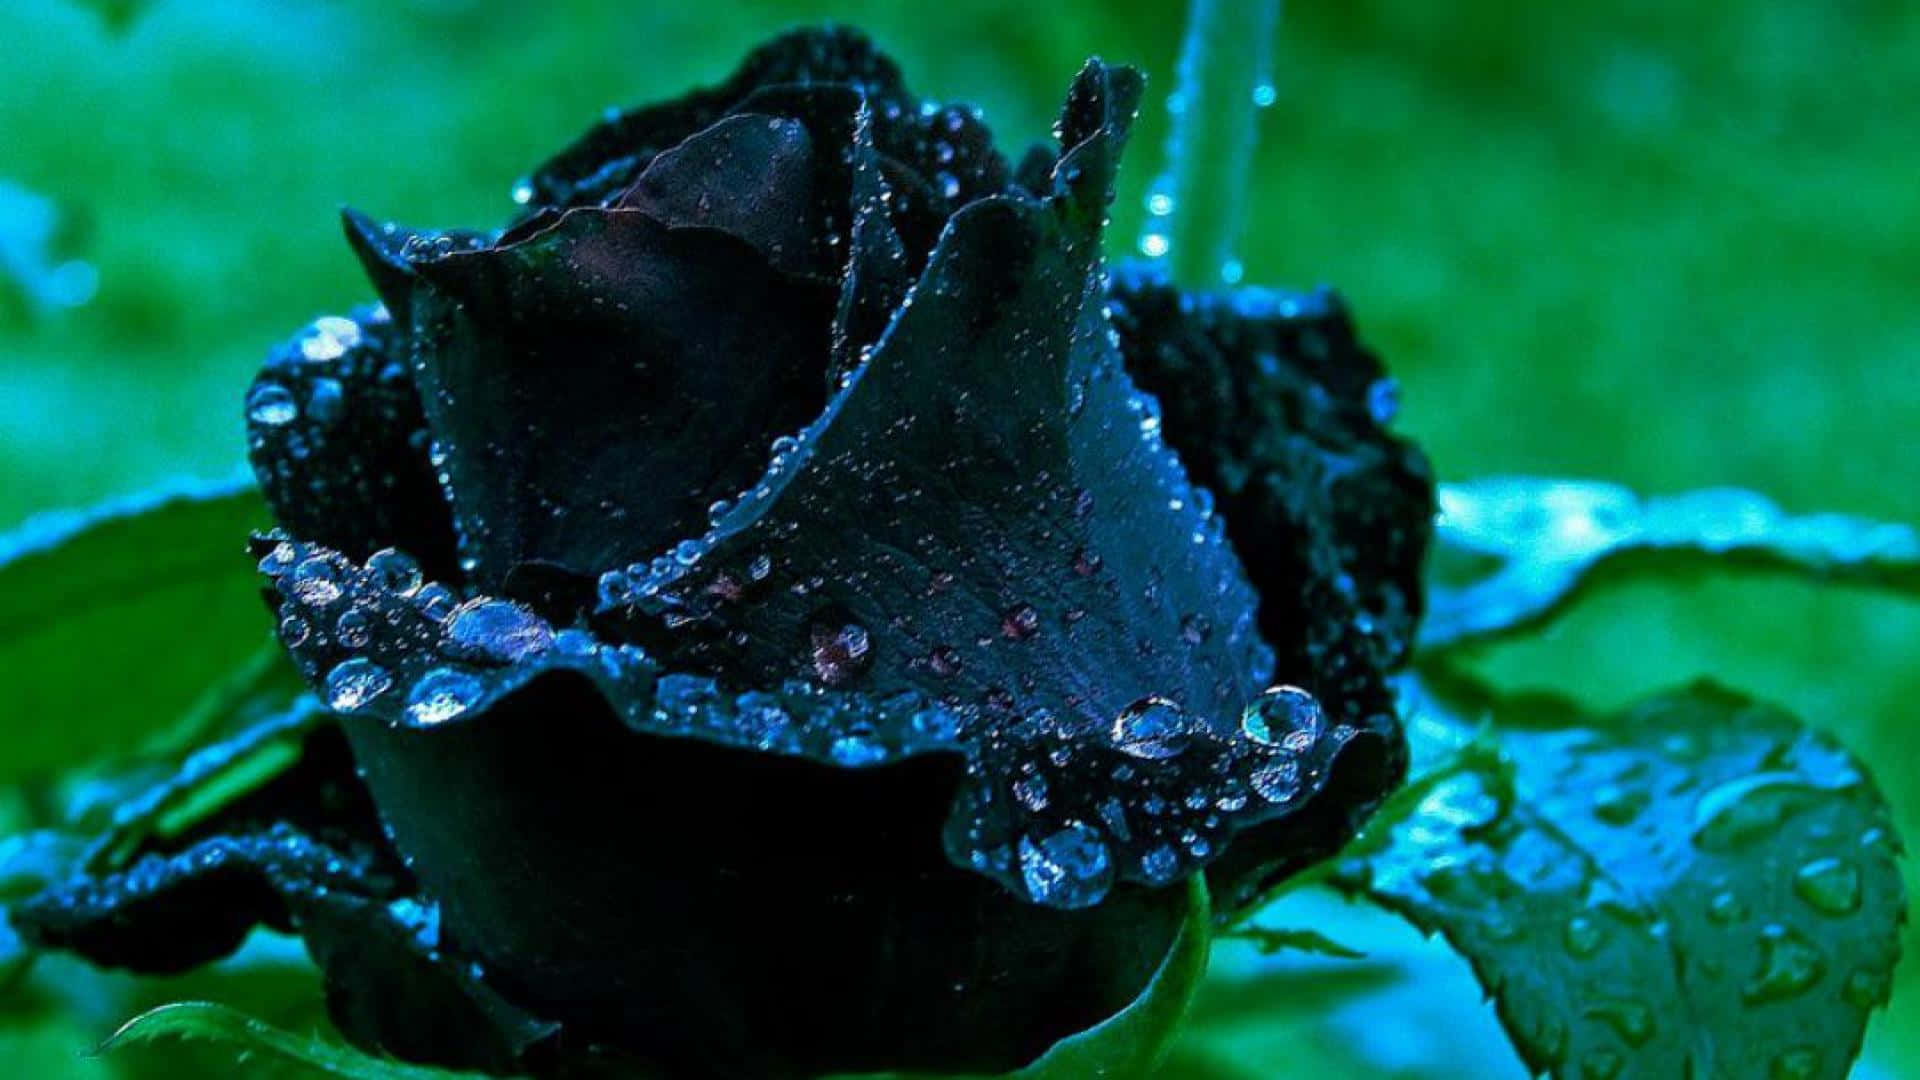 A Beautiful Black Rose with its Elegant Petals Exposed